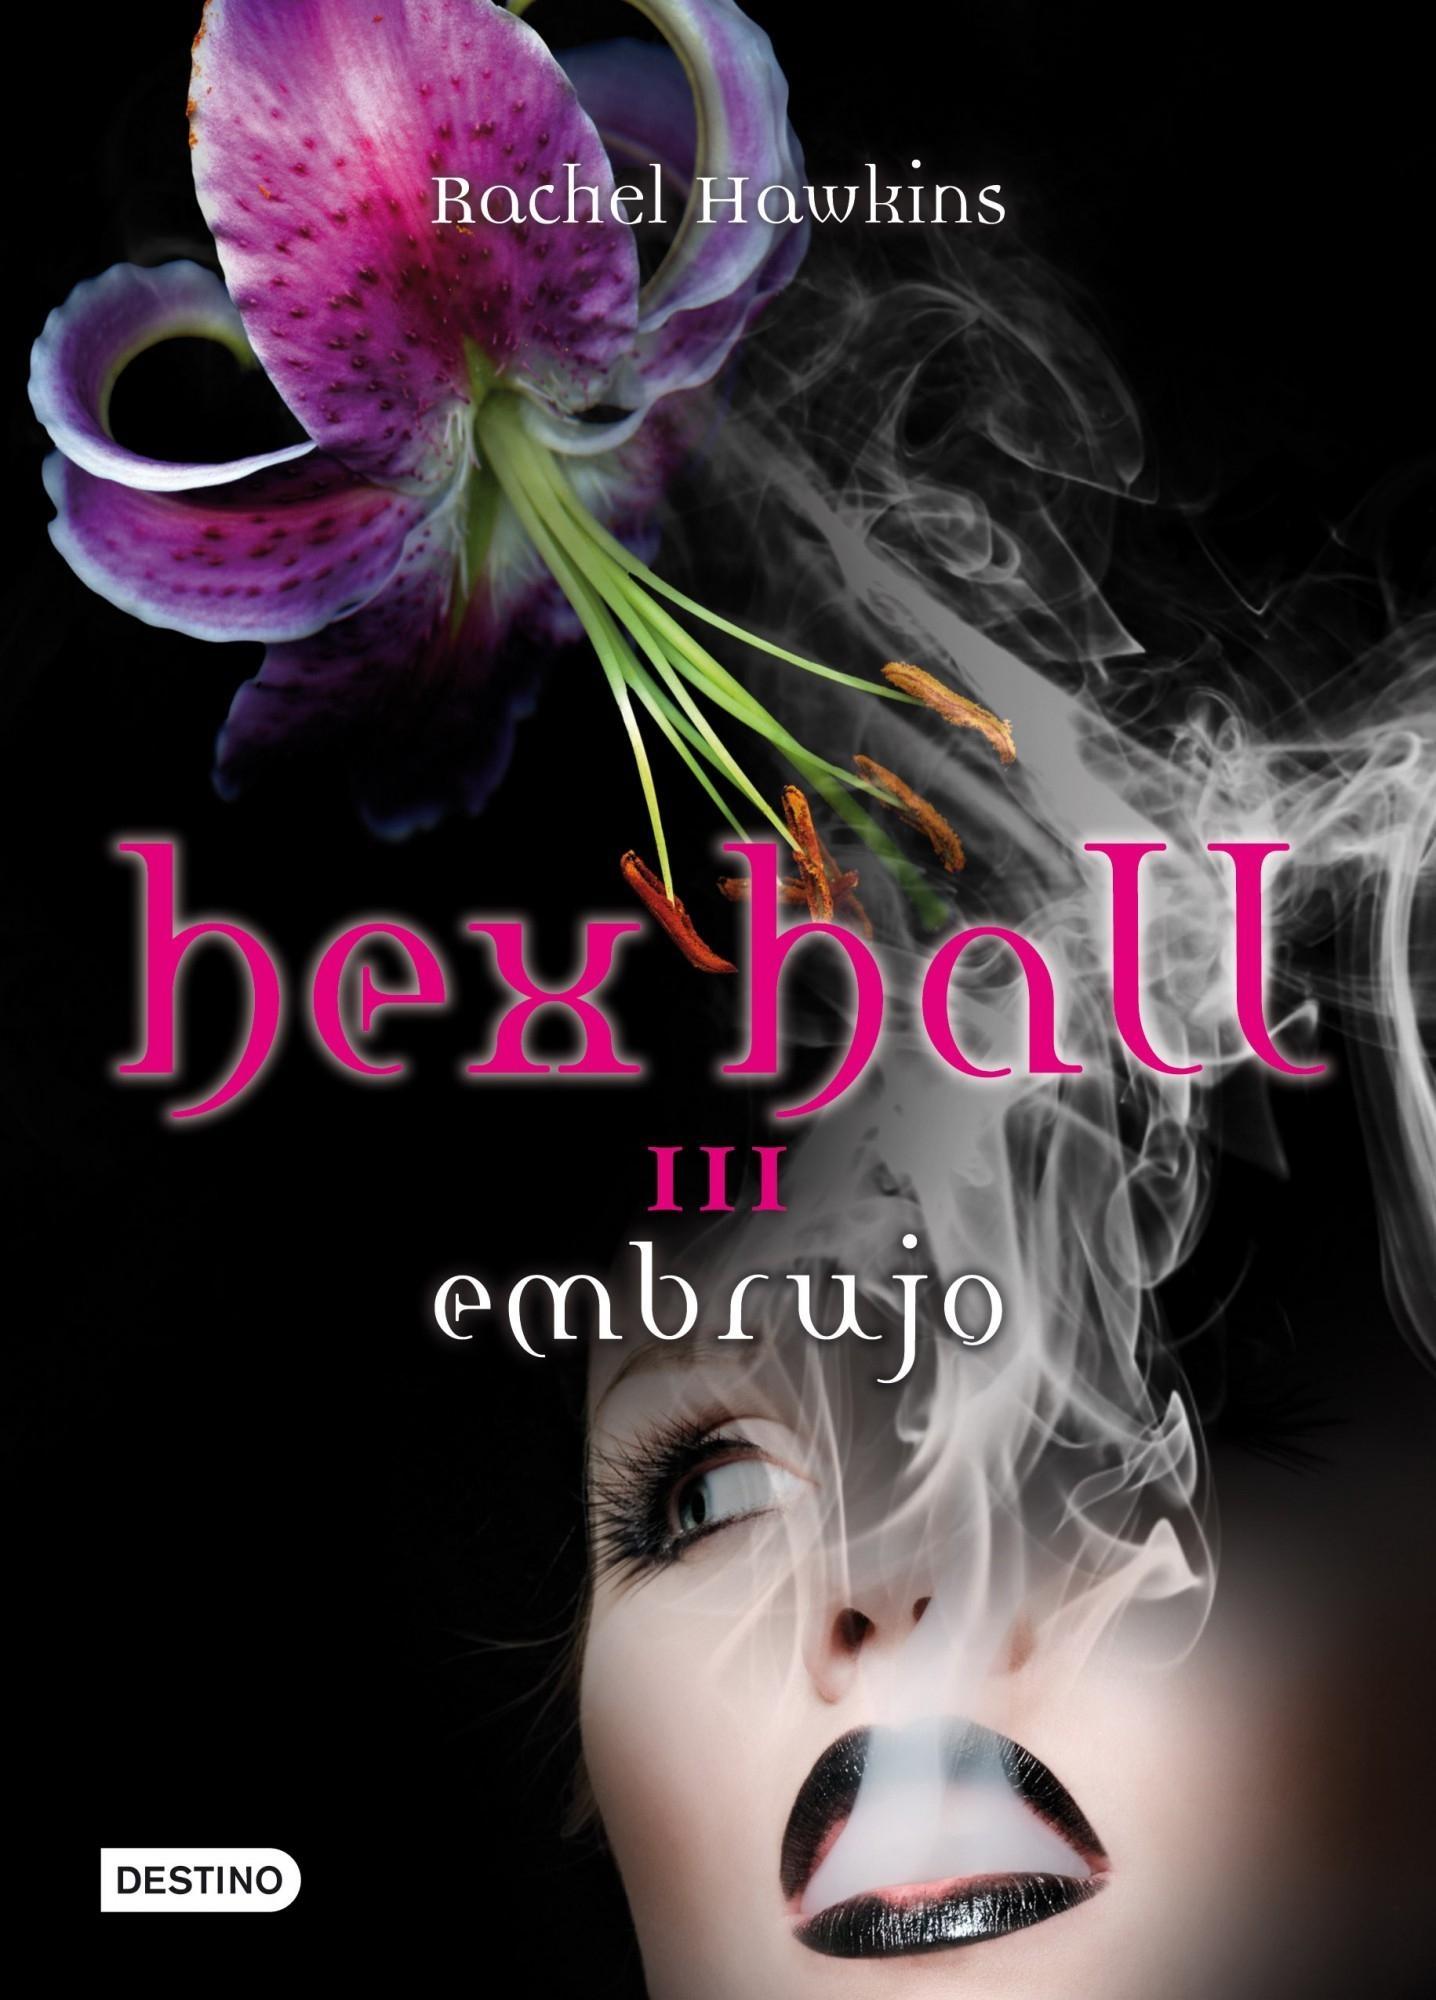 Embrujo "Hex Hall 3". 